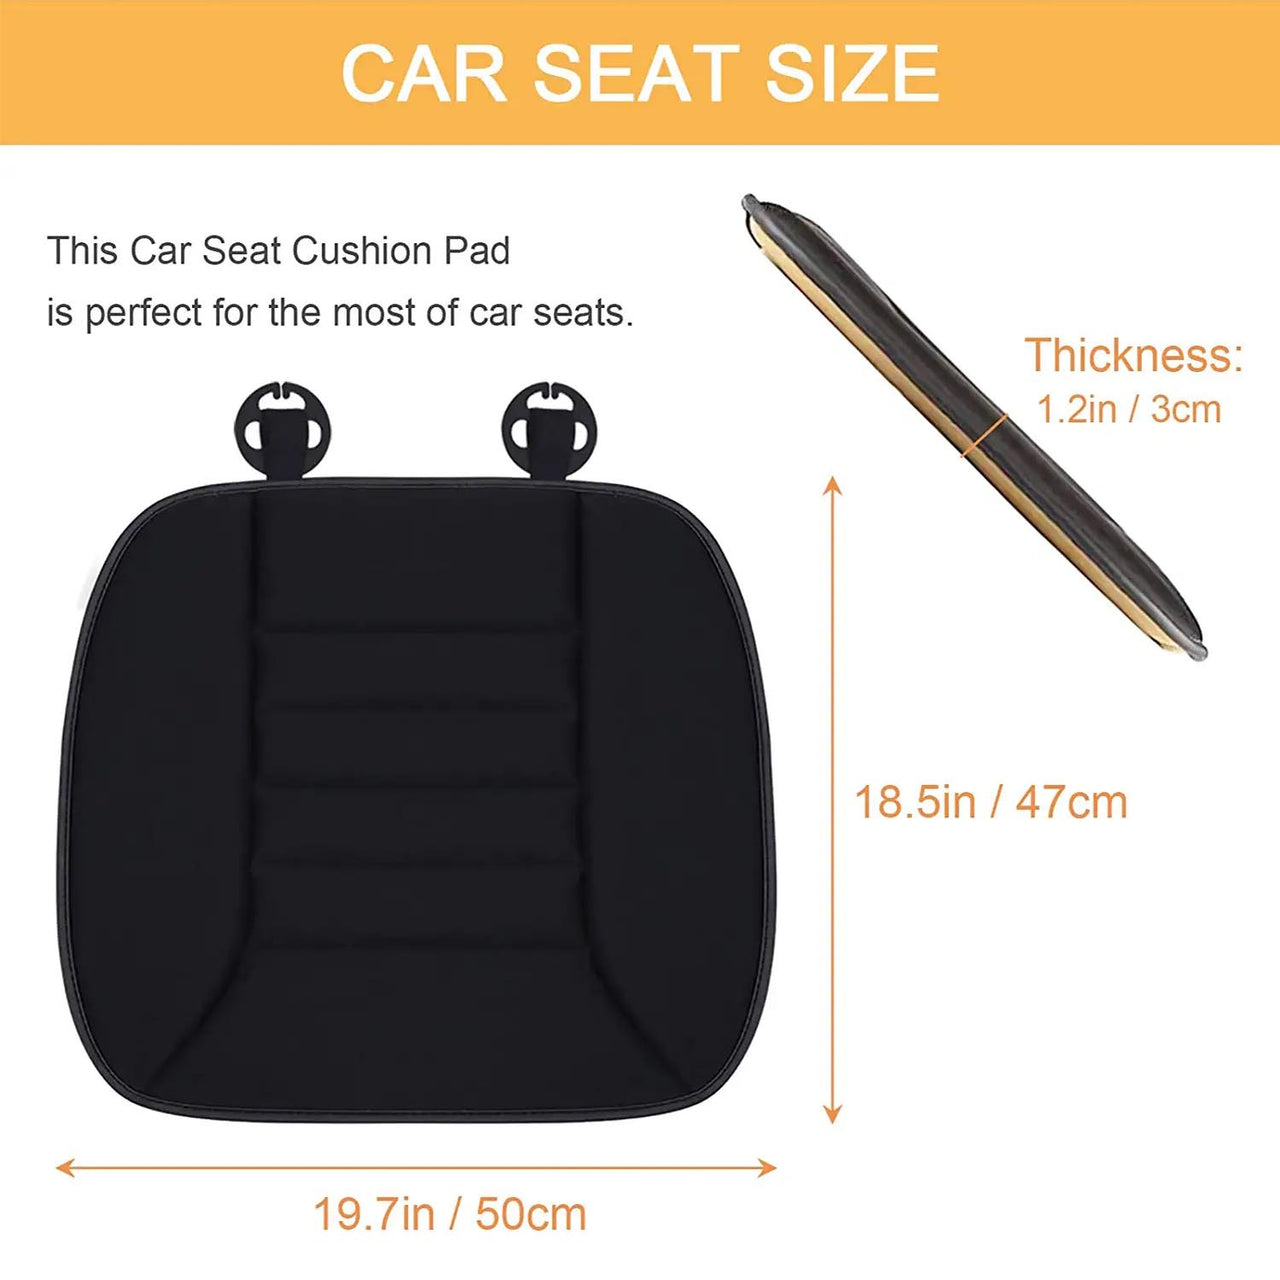 Car Seat Cushion with 1.2inch Comfort Memory Foam, Custom Fit For Your Cars, Seat Cushion for Car and Office Chair HA19989